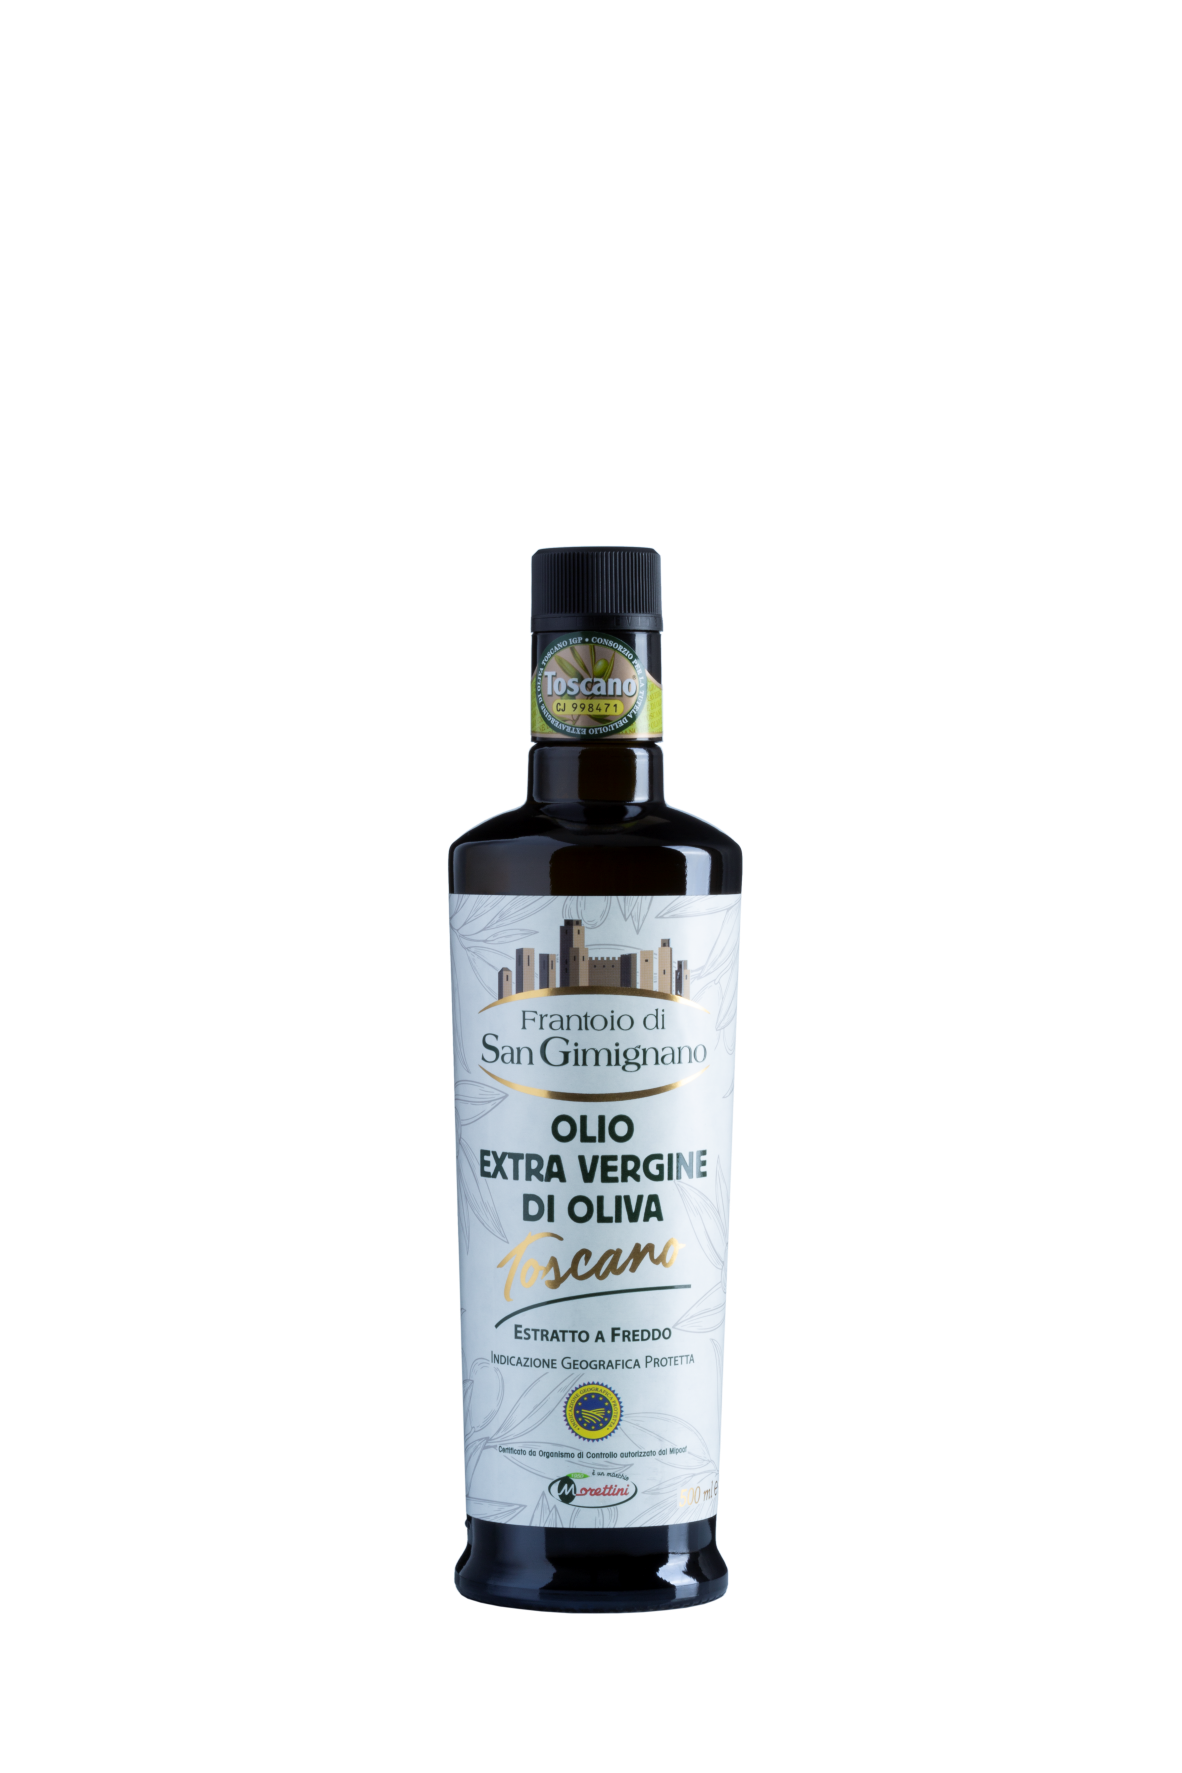 Tuscany extra virgin olive oil IGP